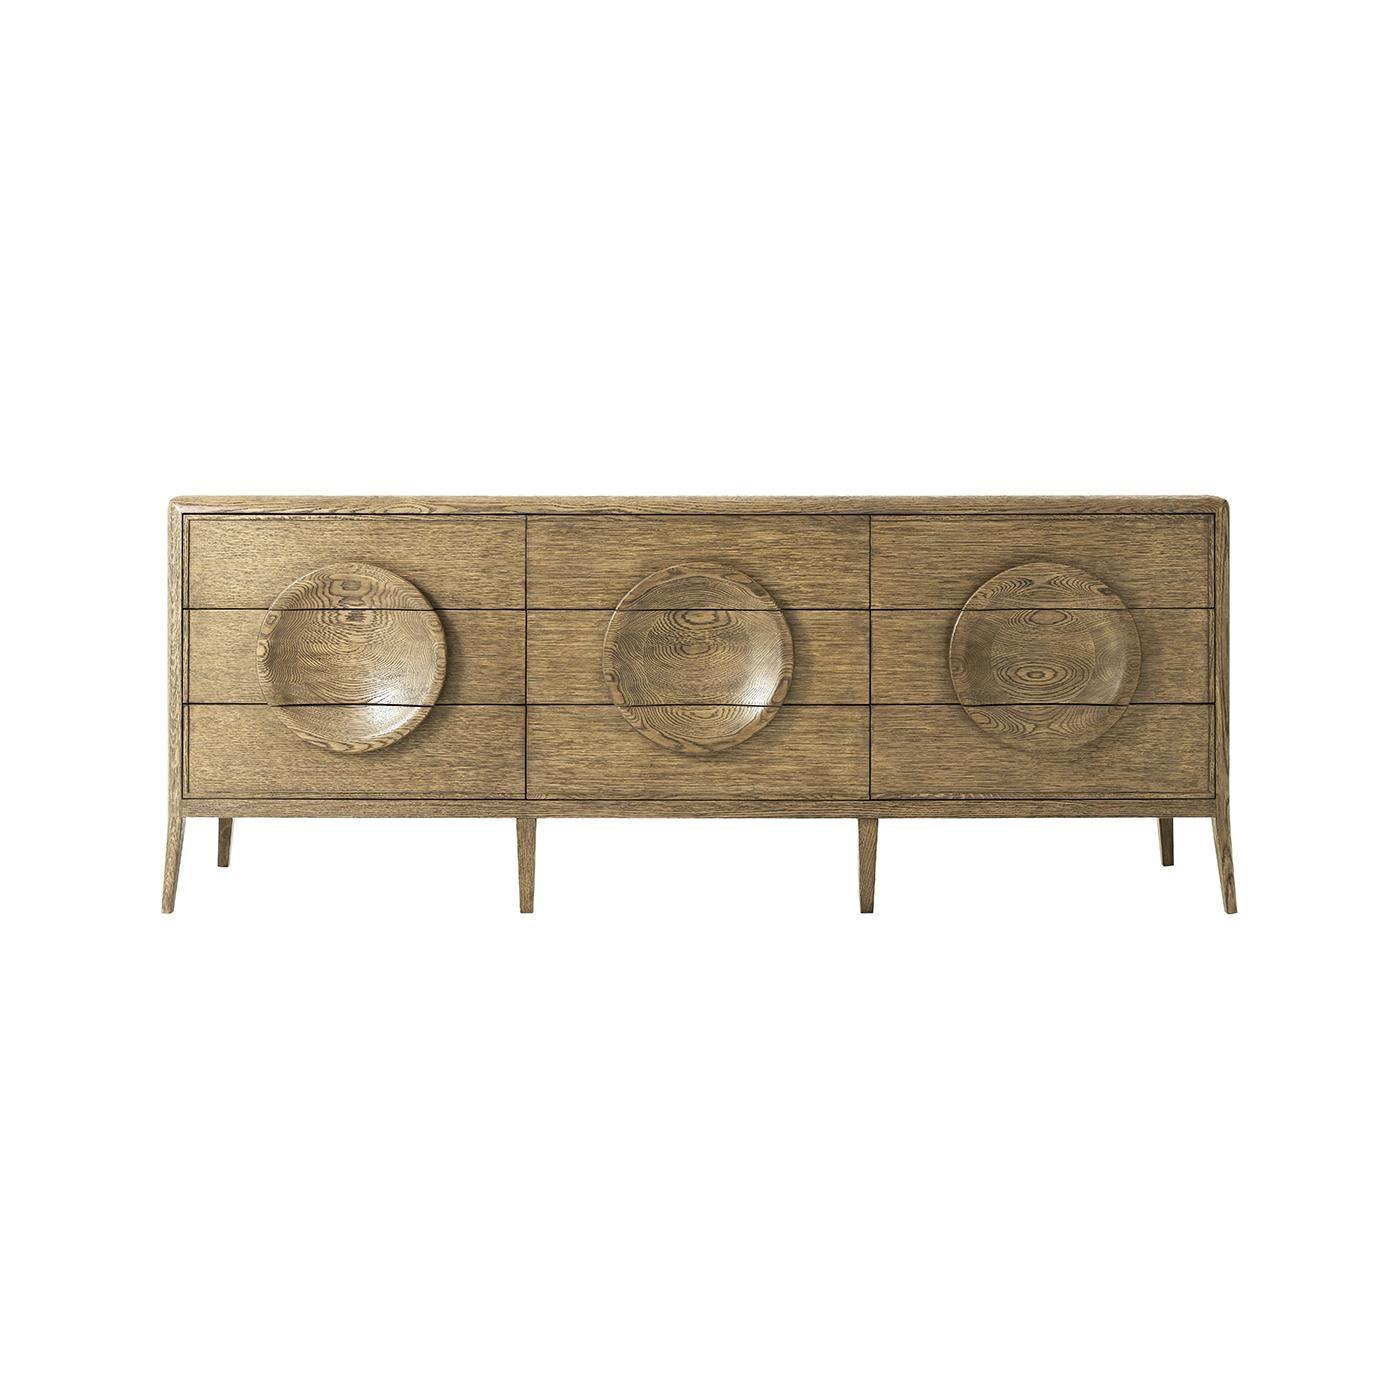 A Mid-Century Modern style solid oak and quarter oak veneered nine-drawer dresser. With dish form, decorative drawer pulls and splayed legs. The self-closing drawers are lined on the bottoms with felt.